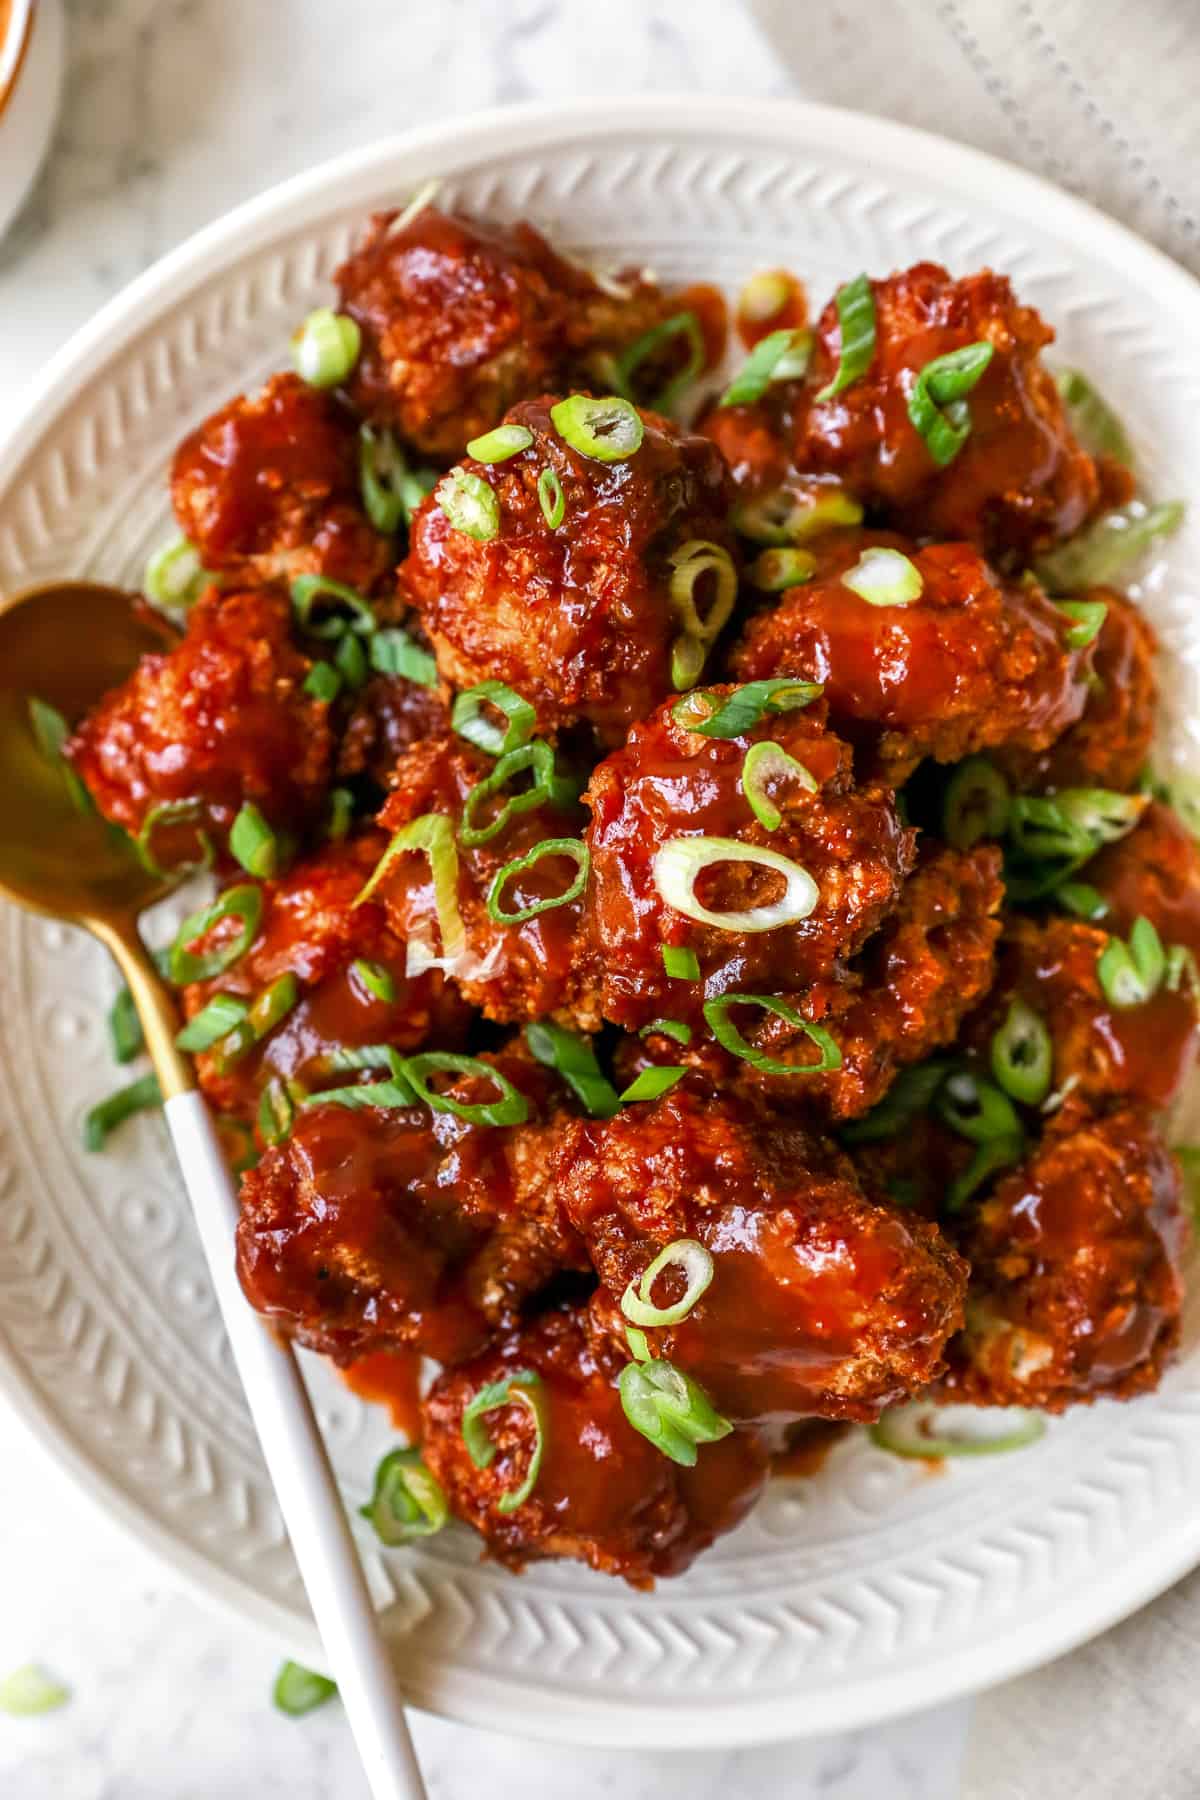 Bbq cauliflower wings on a plate with a spoon beside it.